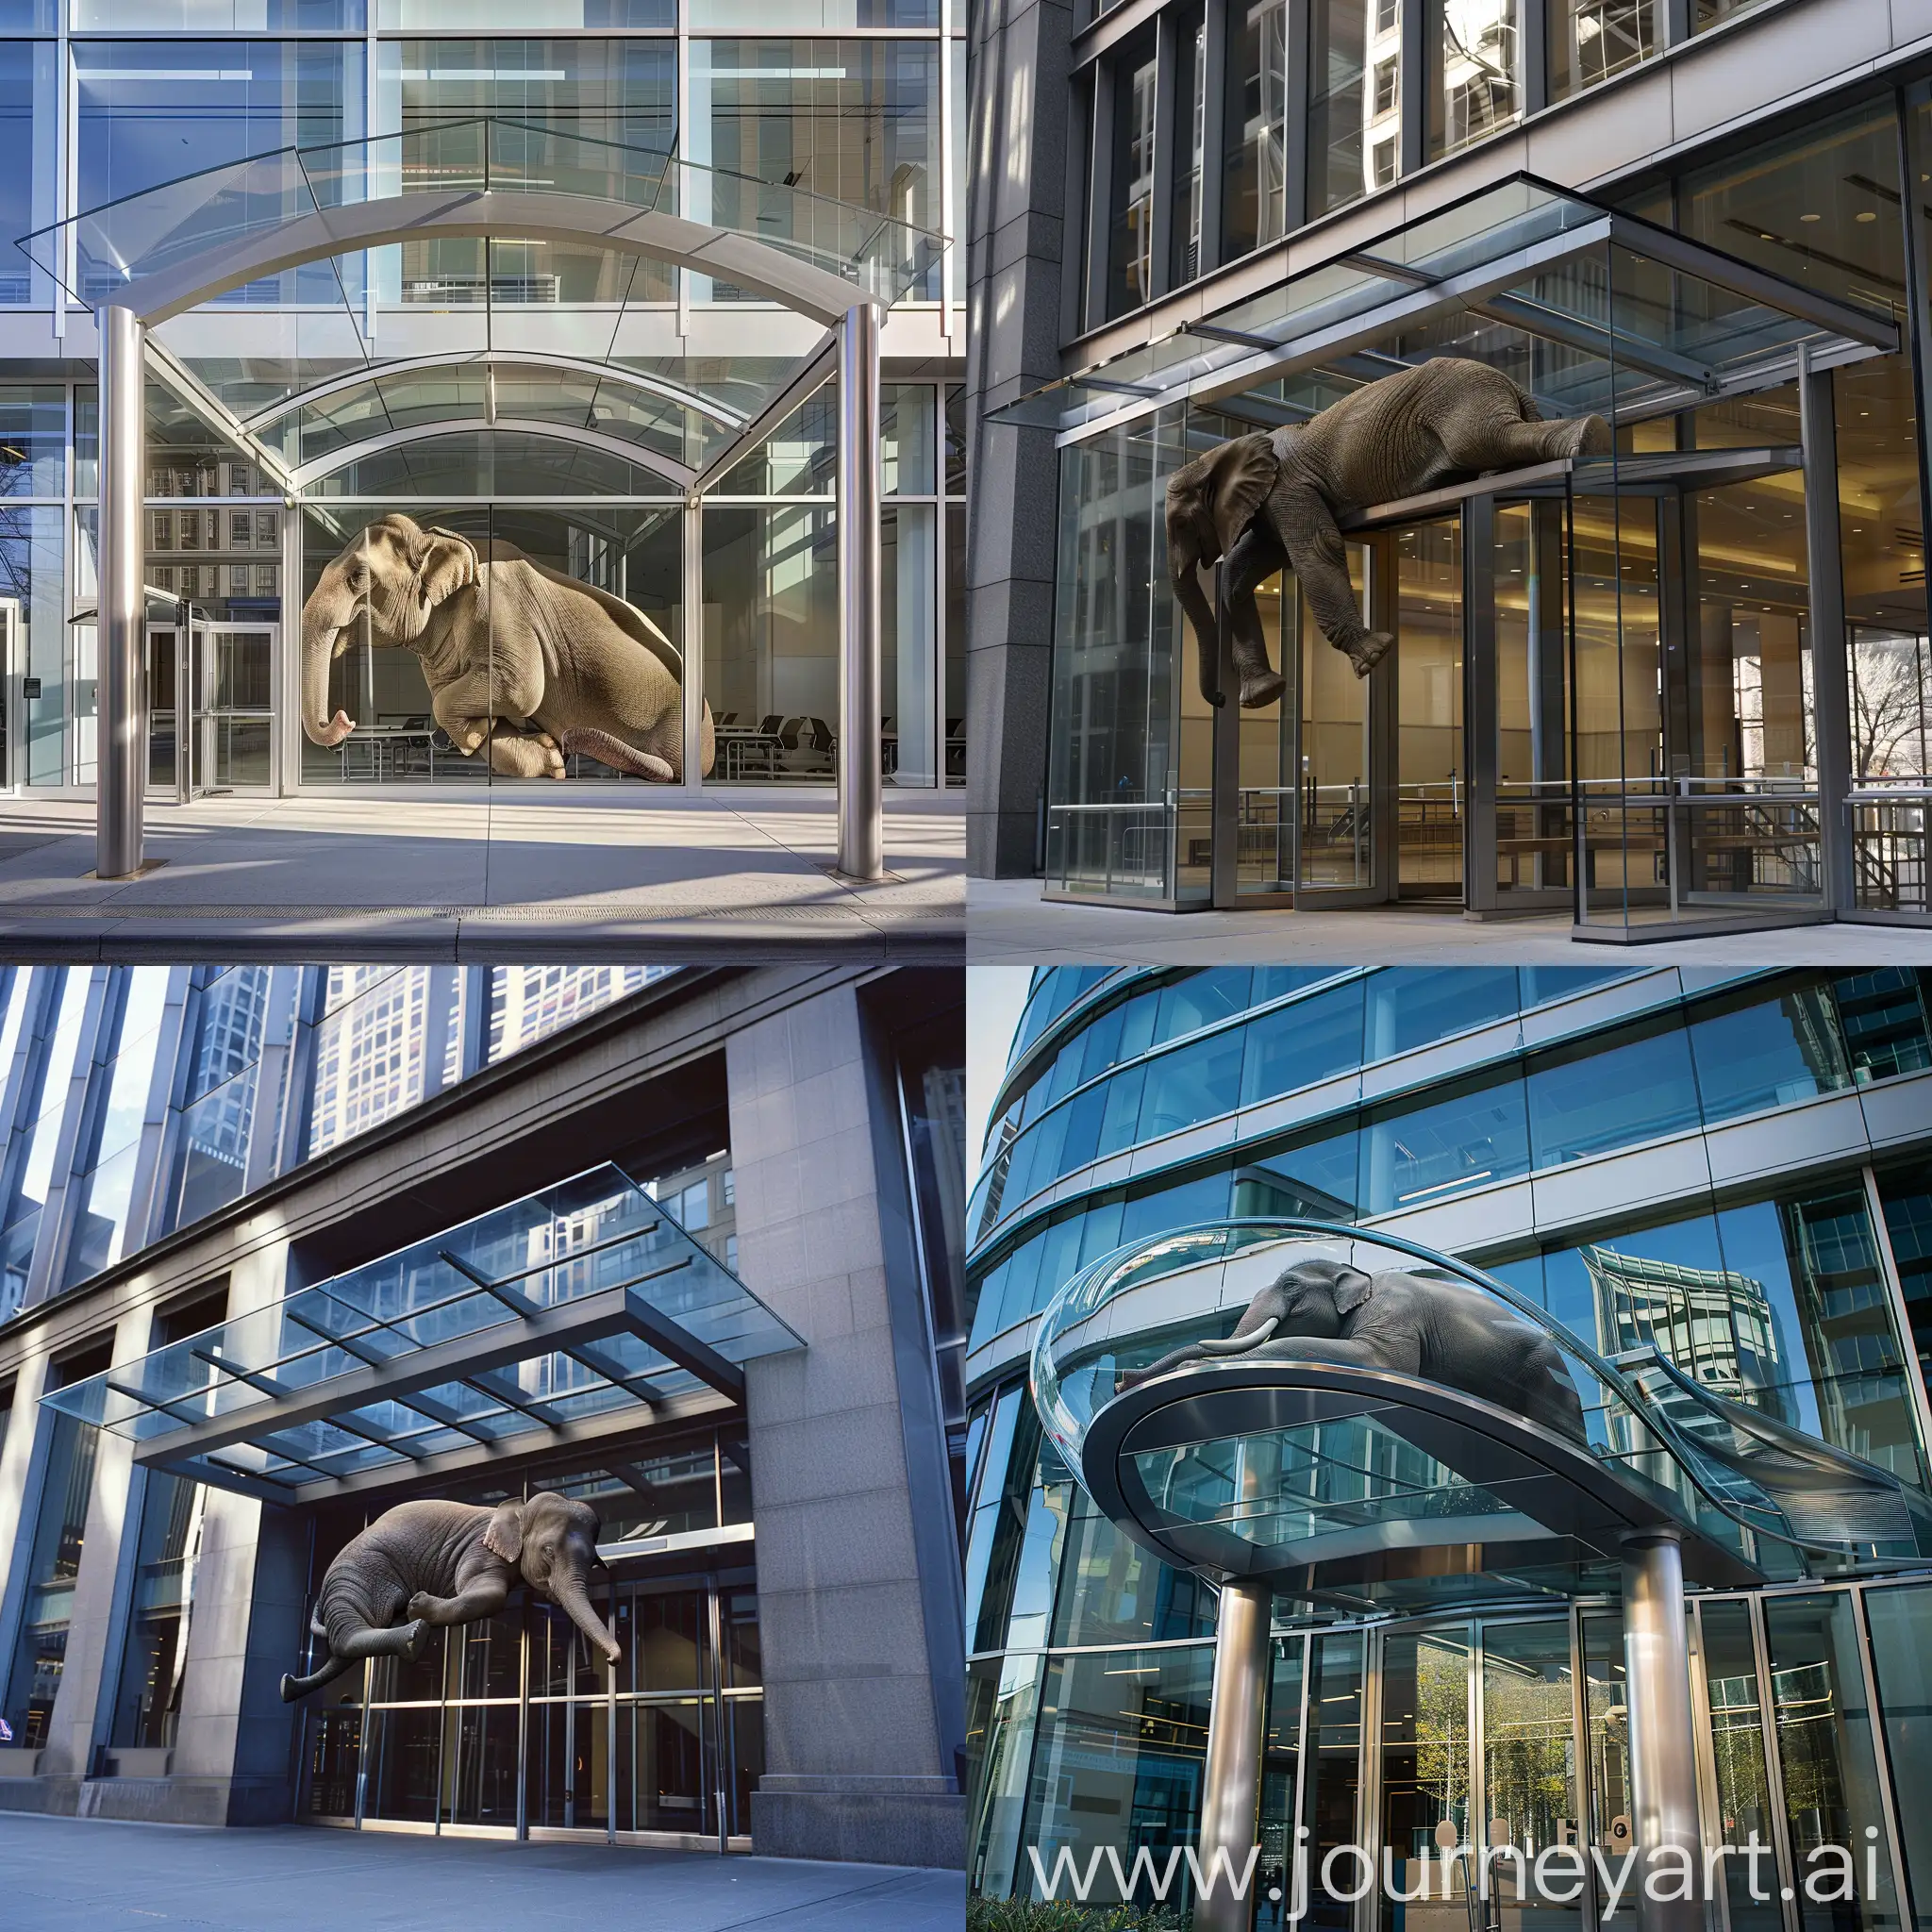 Glass canopy over the entrance to an office building. A live elephant lies on its stomach on the visor